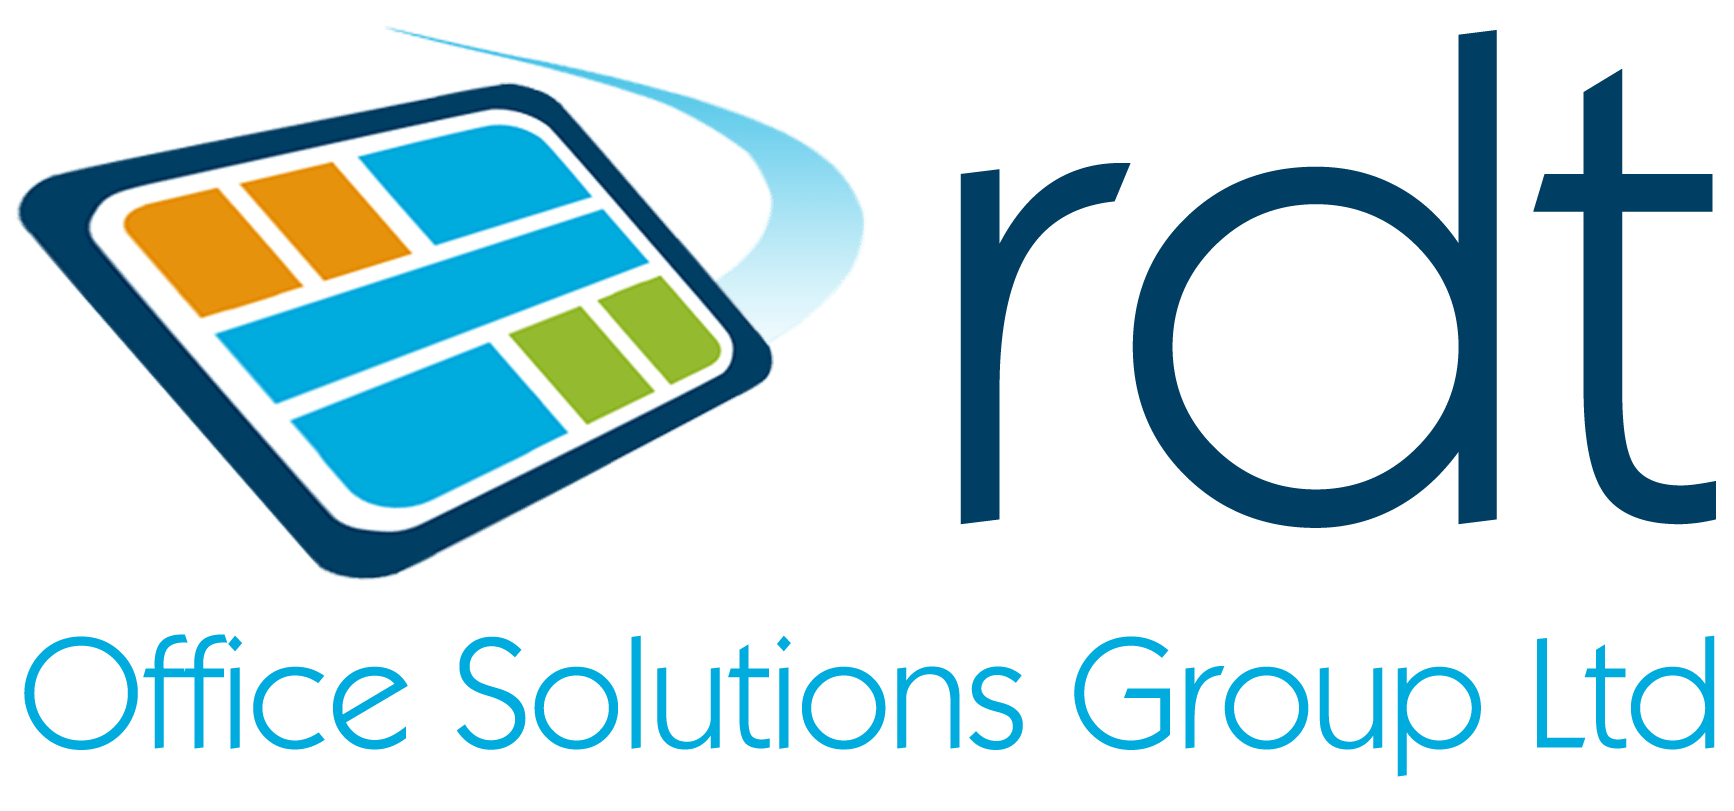 RDT Logo - RDT Competitors, Revenue and Employees - Owler Company Profile